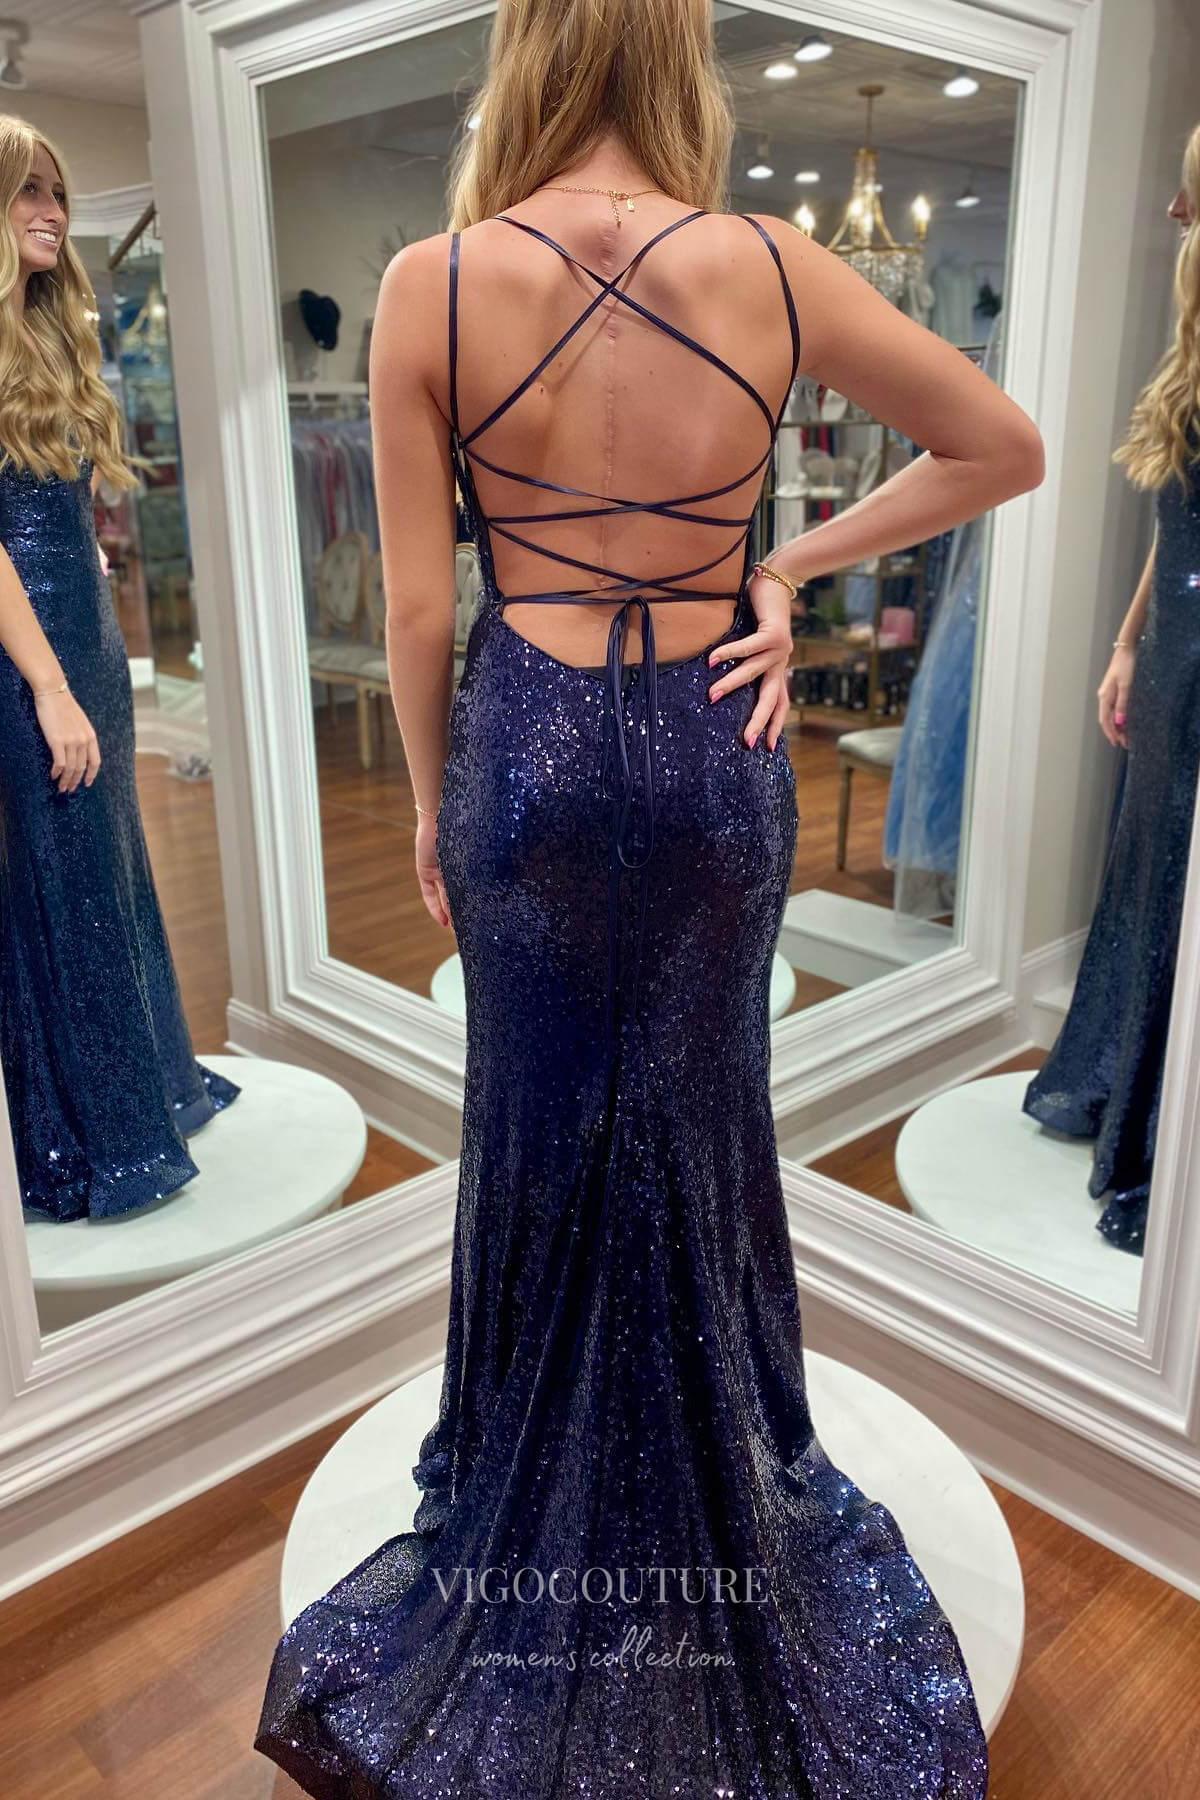 vigocouture Shimmering Light Blue Sequin Mermaid Prom Dress with Spaghetti Strap and Corset Back 22229 Black / US4